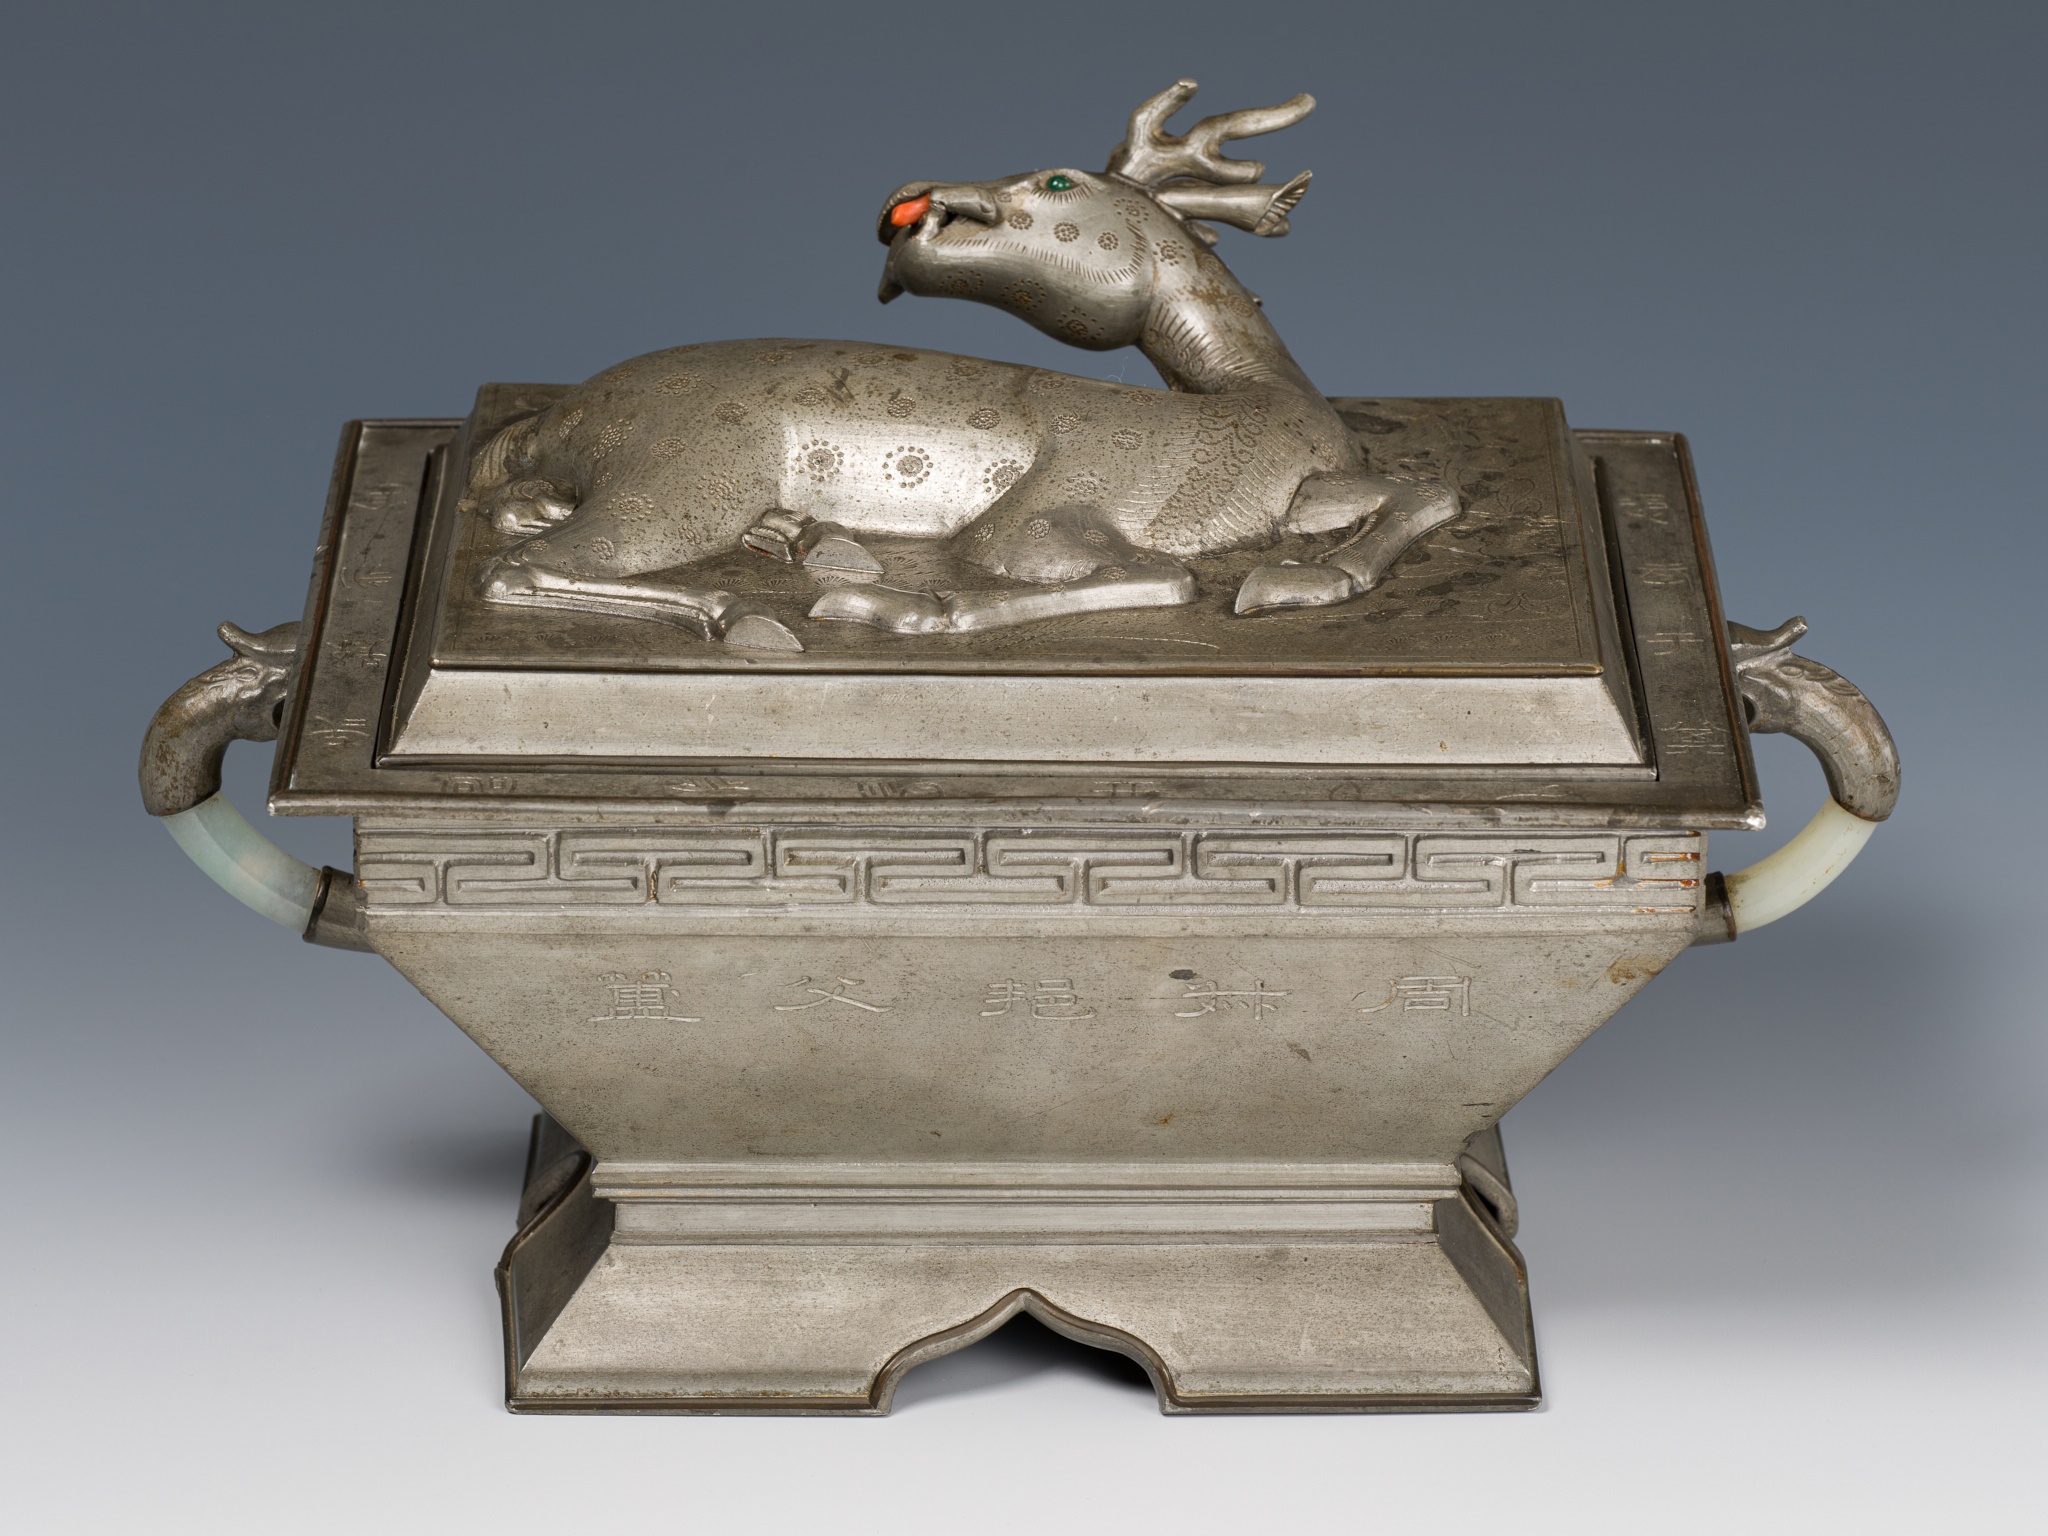 A JADE-INLAID PEWTER 'DEER WITH LINGZHI' ARCHAISTIC VESSEL AND COVER, FU, QING DYNASTY